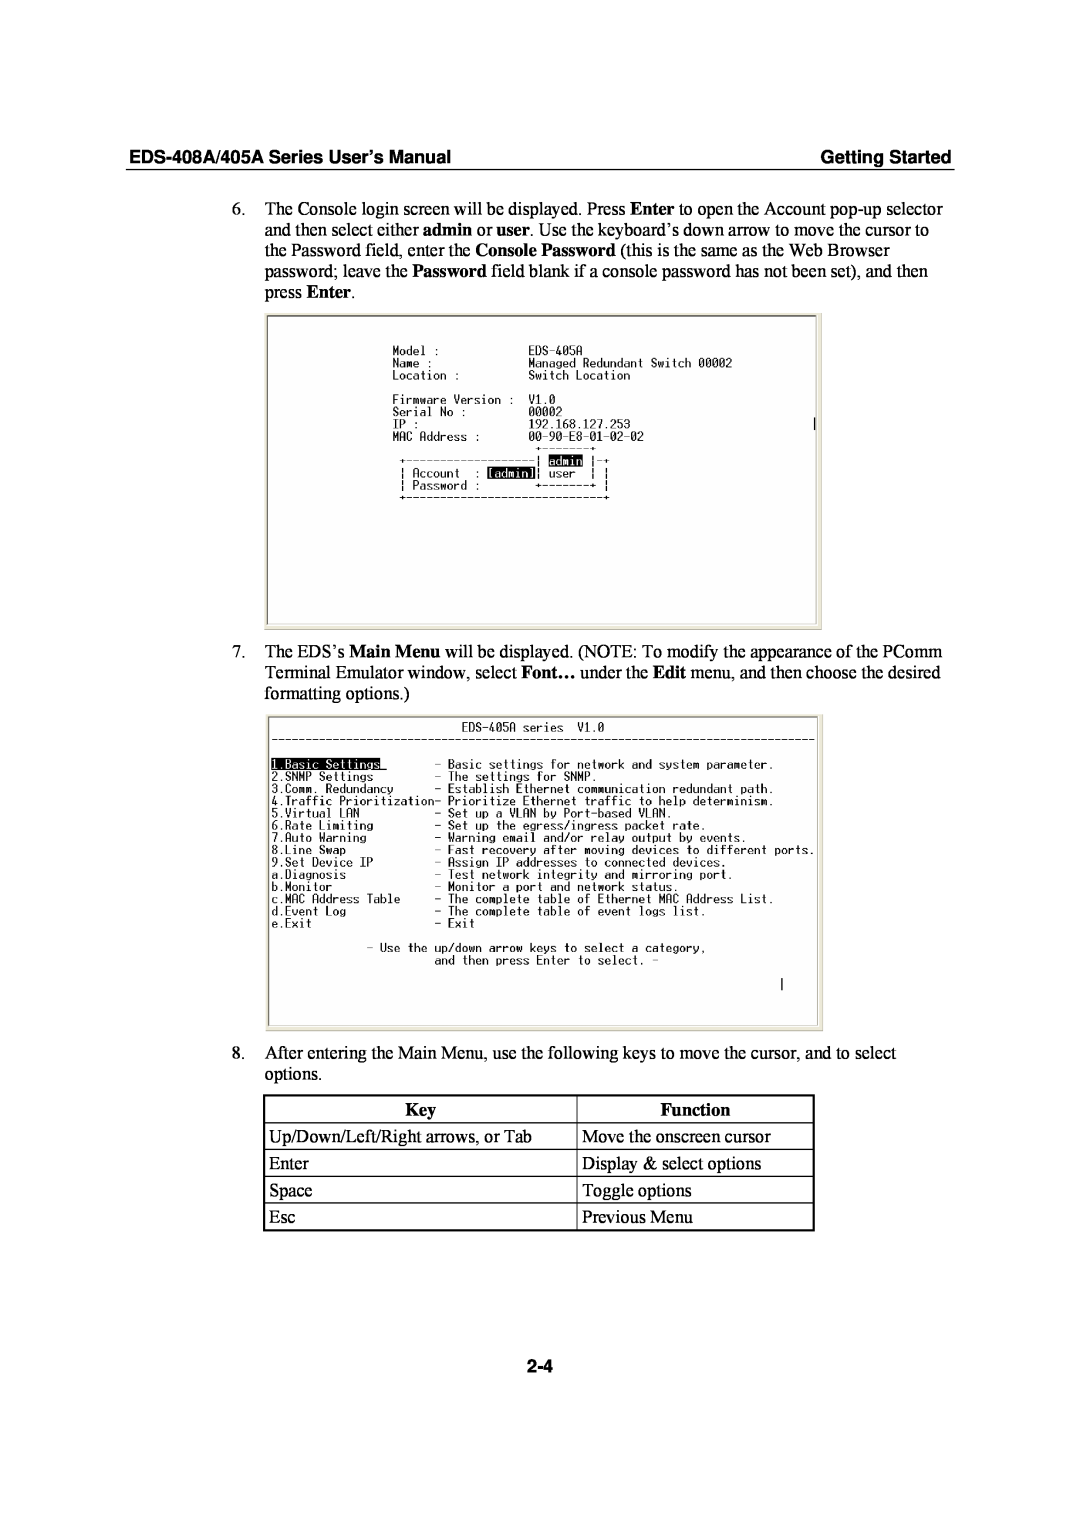 Moxa Technologies EDS-405A user manual Function, EDS-408A/405A Series User’s Manual, Getting Started 